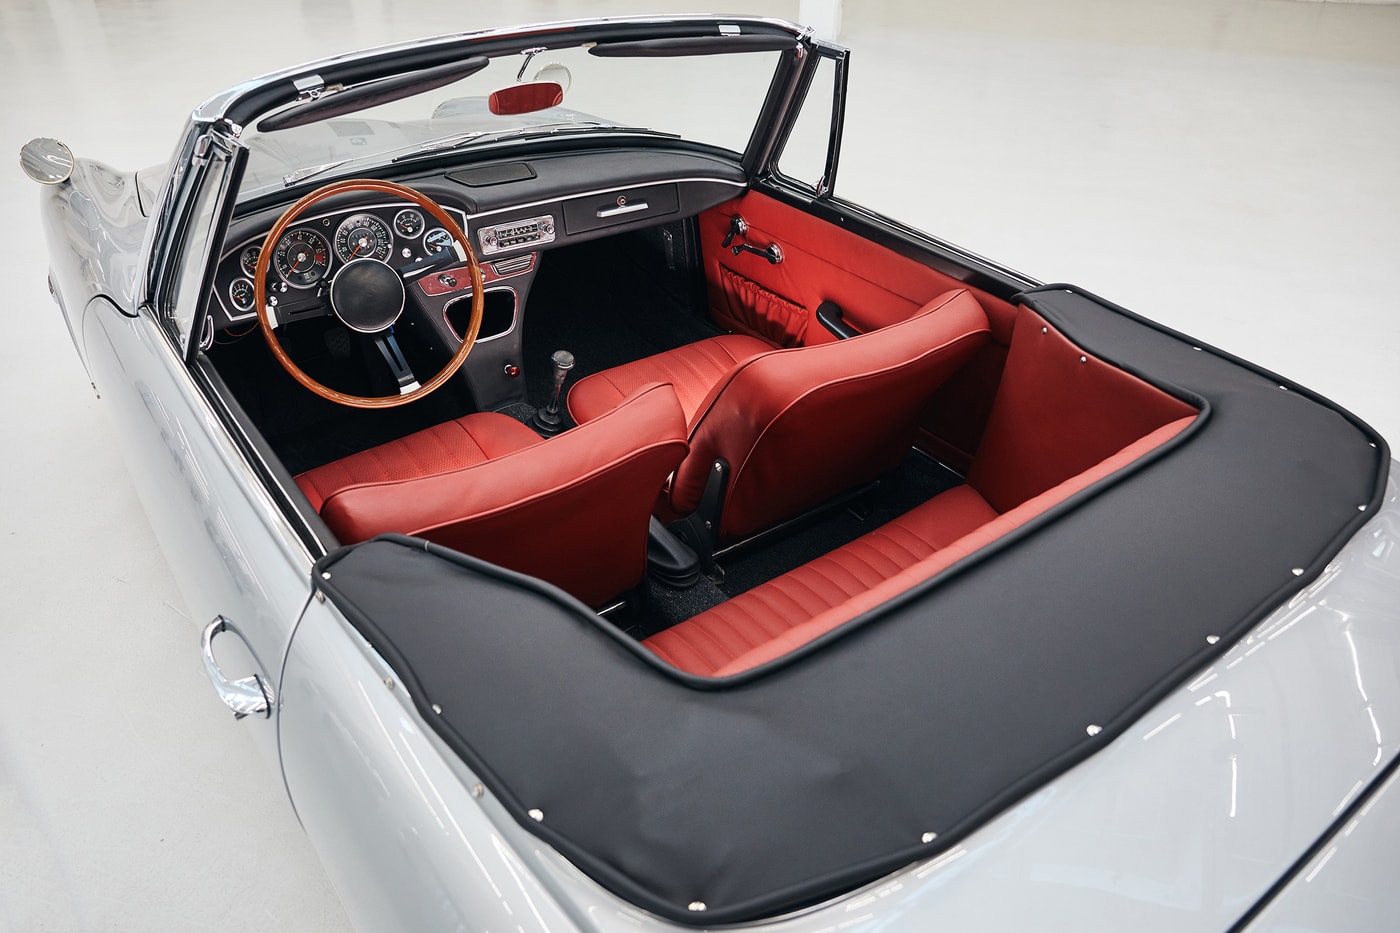 BMW Resurrects the Only Remaining 1600 GT Convertible